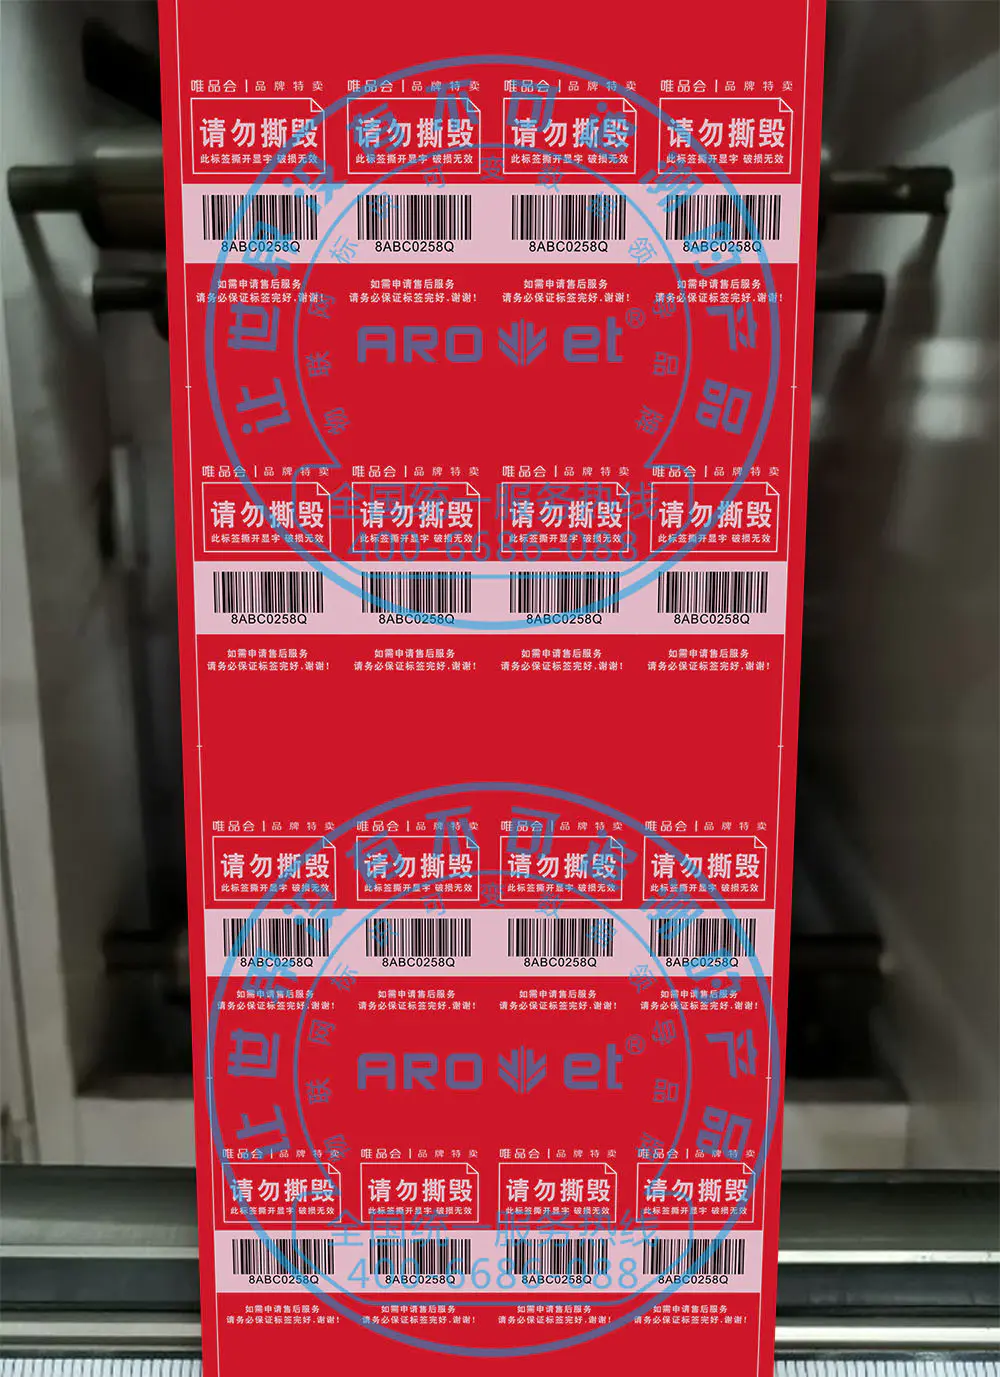 Rotary Digital Label Qr Code Number Coding Machines